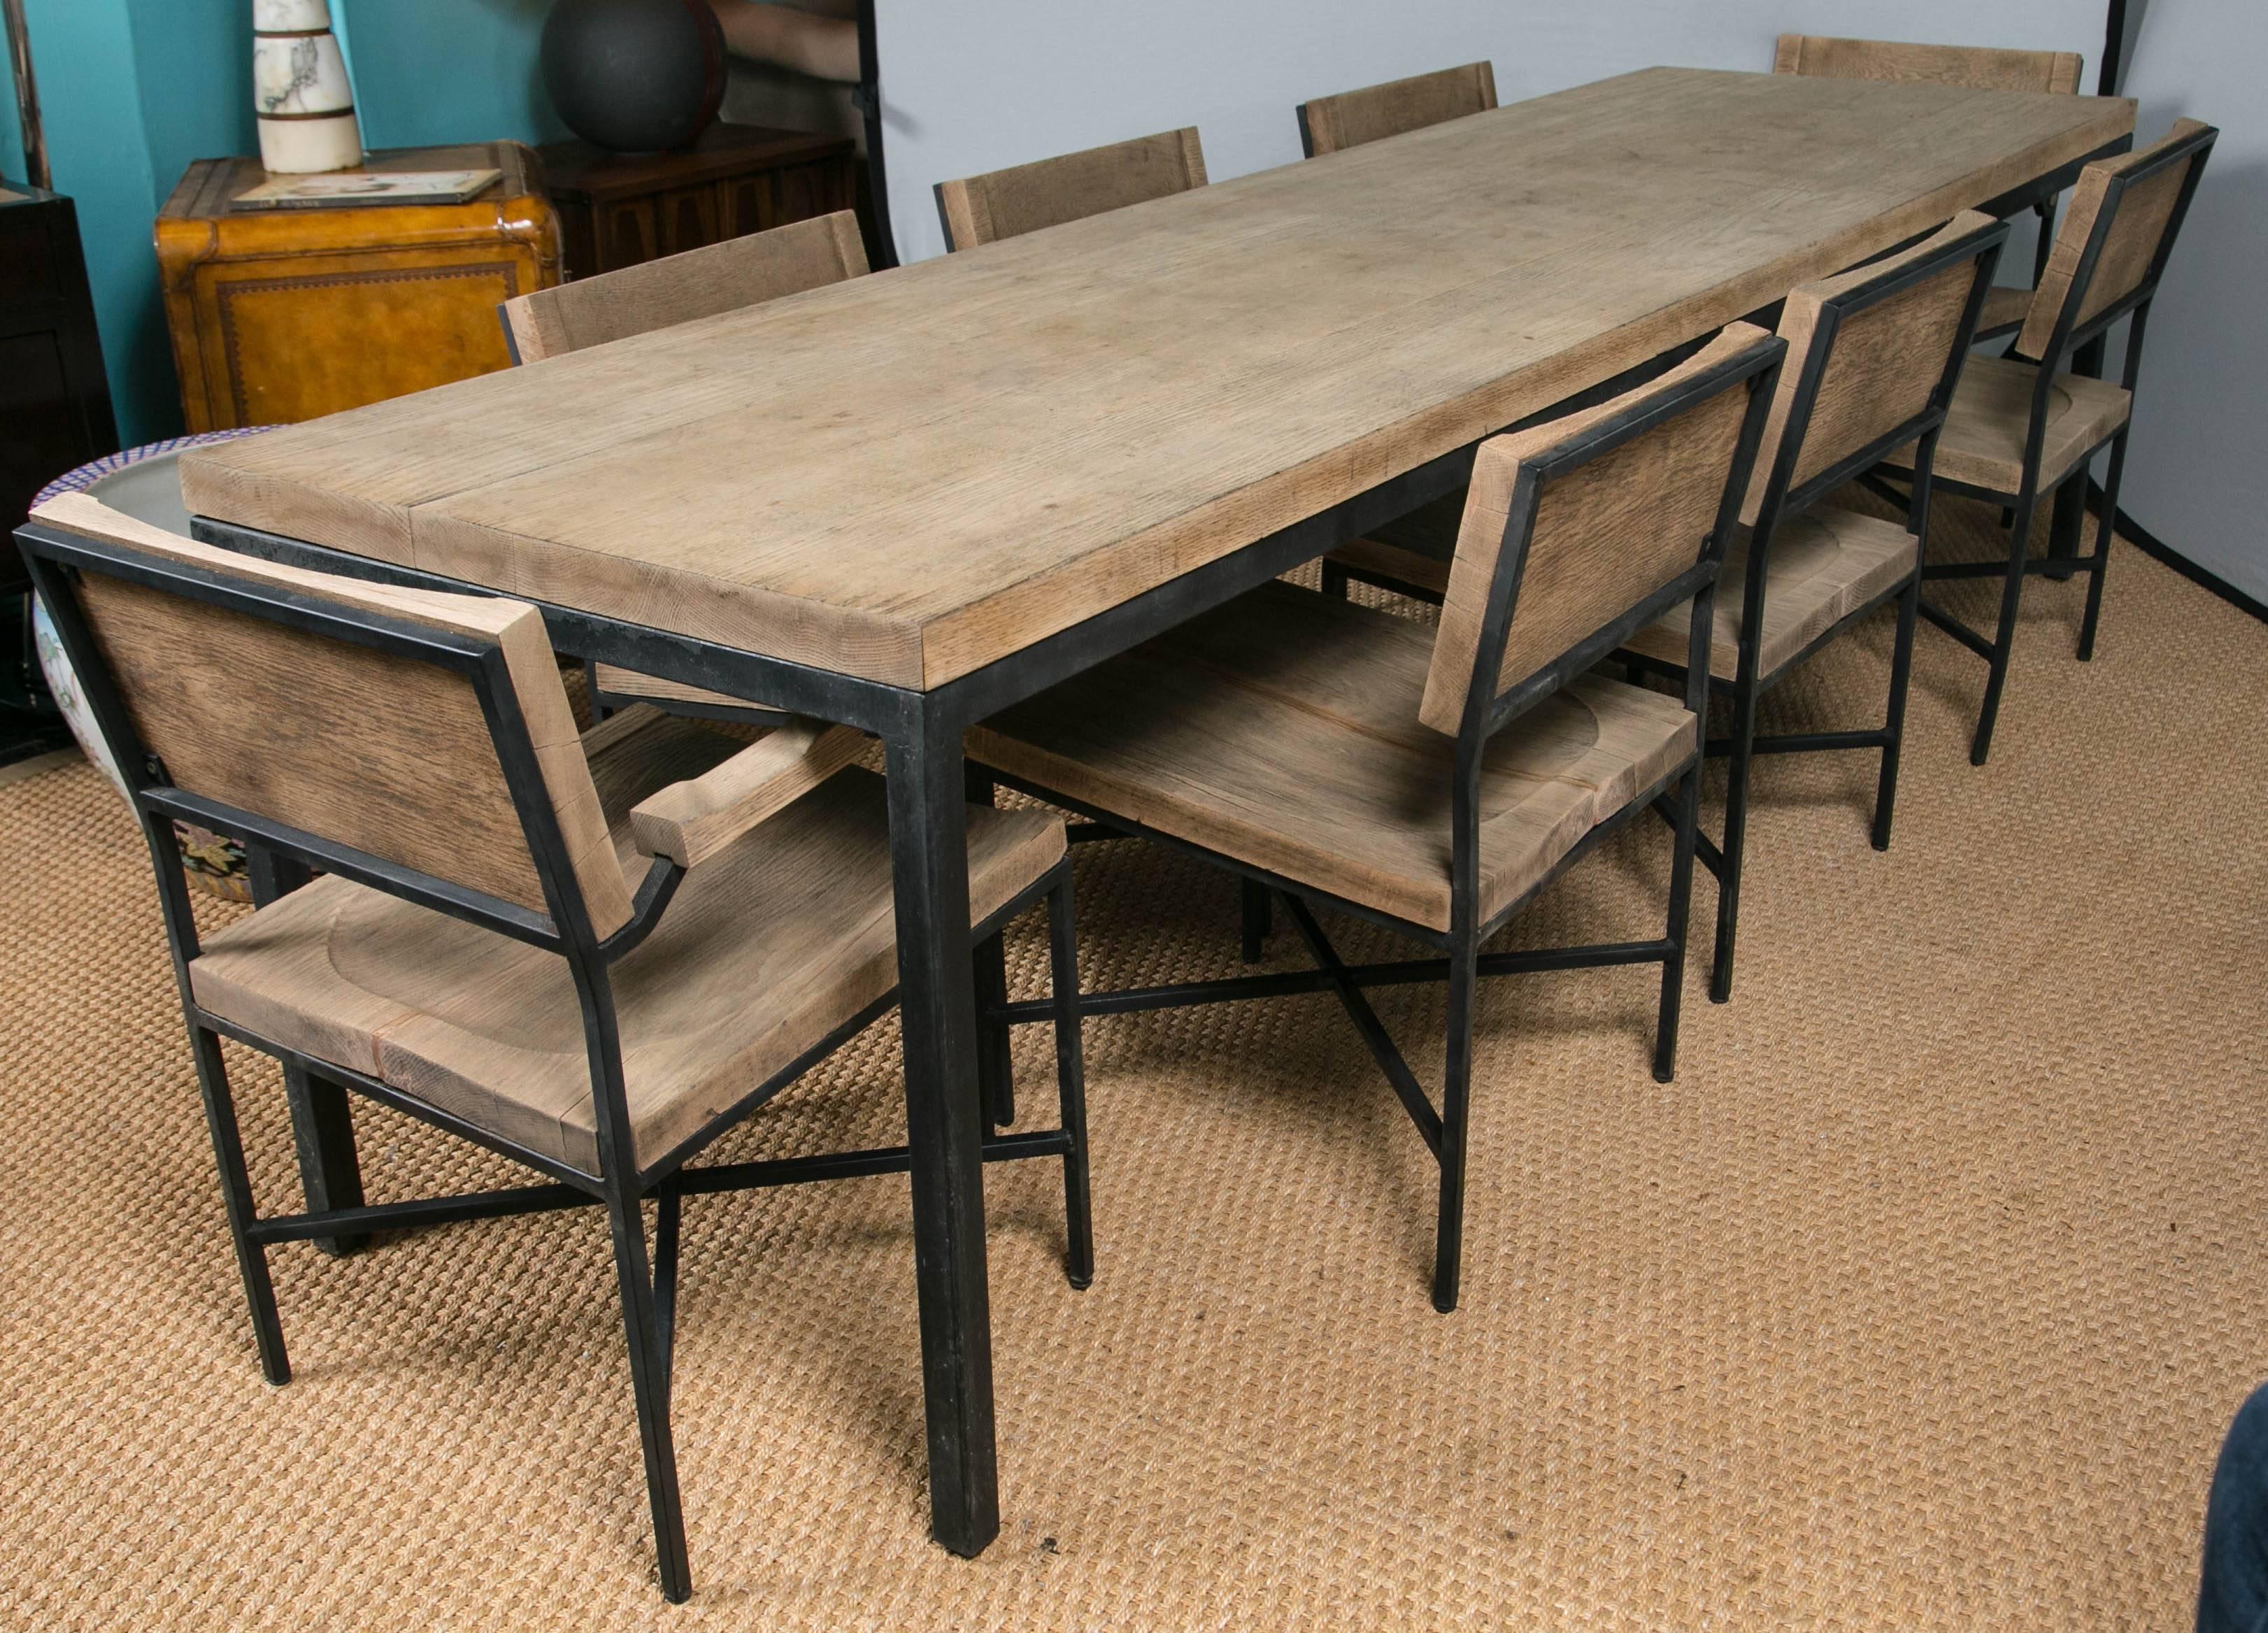 Attributed to early Knoll/Drake when Knoll collaborated with Drake Manufacturing of Texas. A rare set of a solid wood table, two armchairs and six side chairs supported by an iron frame.